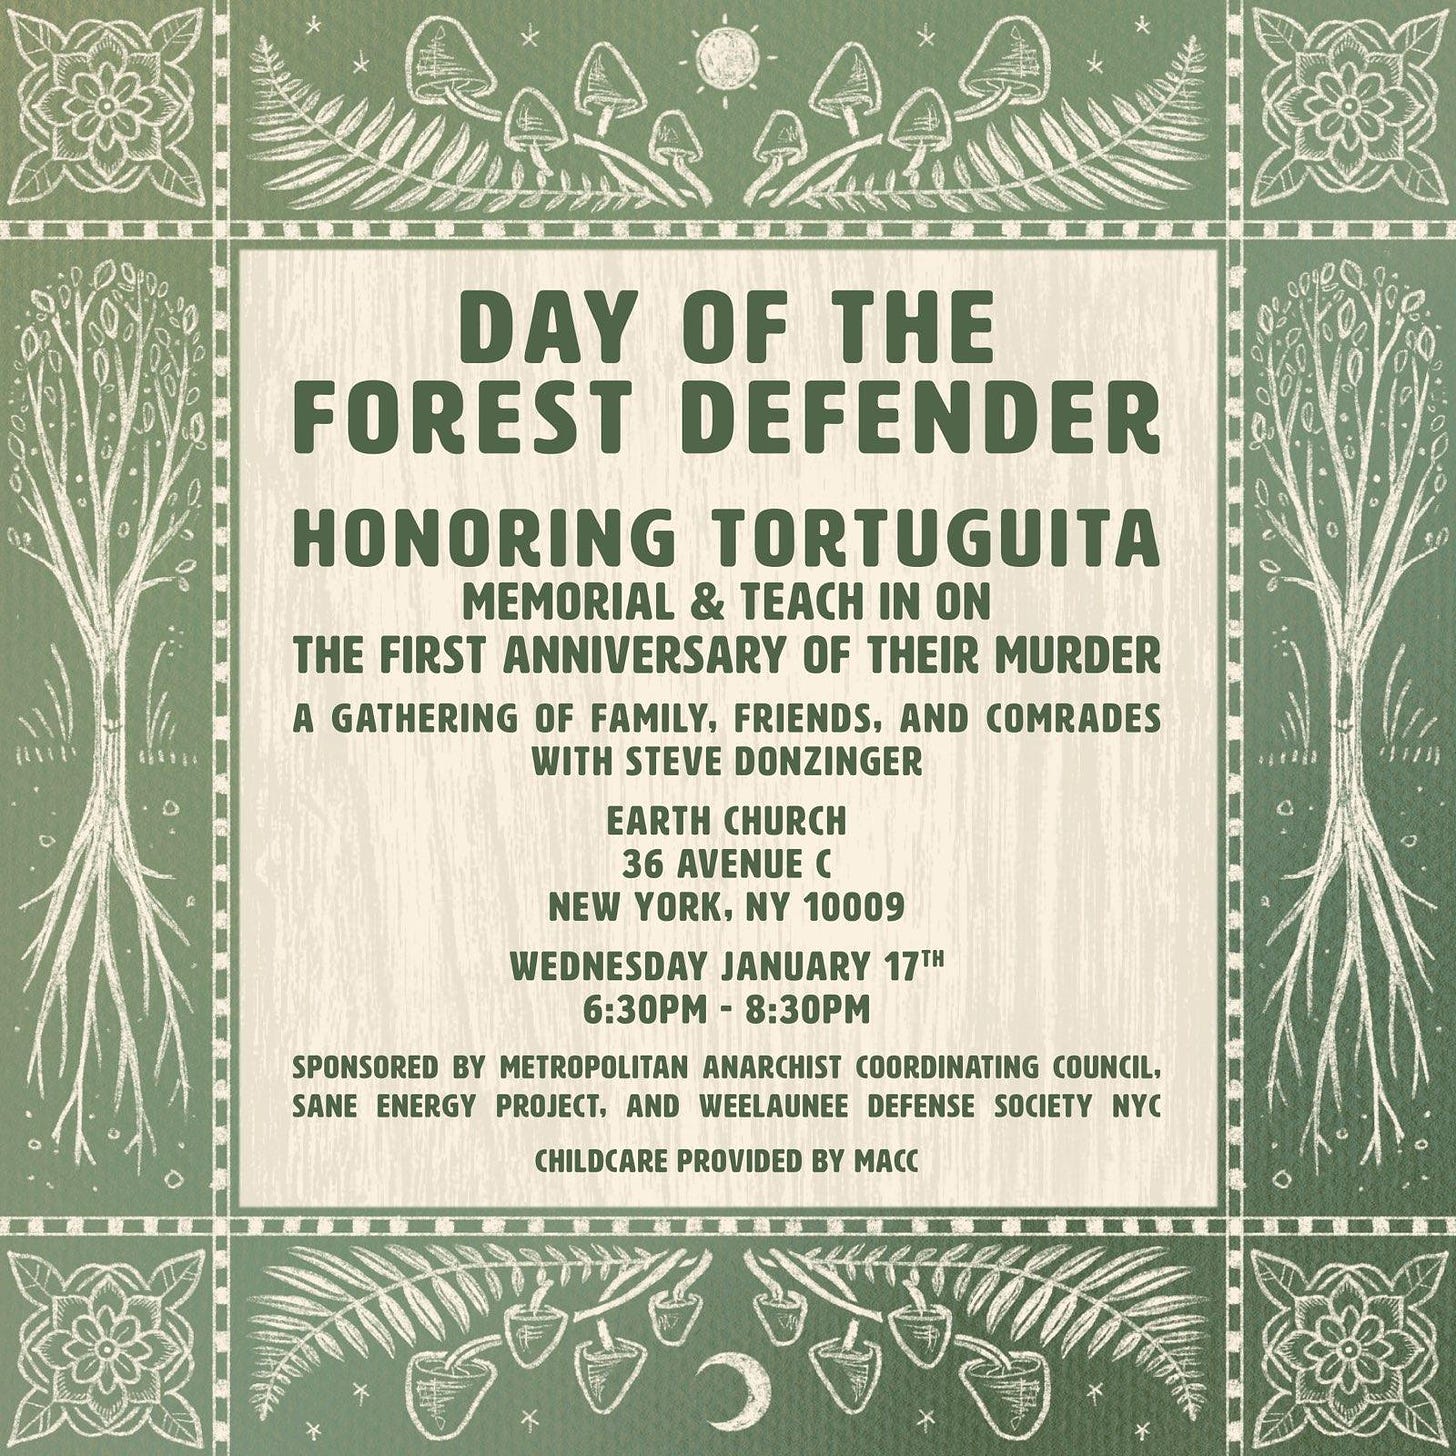 Event Flier with images in green and light brown of flowers, mushrooms, ferns, sun, moon, and trees surrounding center box of text which reads: DAY OF THE FOREST DEFENDER     WEDNESDAY, JANUARY 17TH  6:30-8:30 PM  EARTHCHXRCH, 36 AVENUE C  NEW YORK CITY     HONORING TORTUGUITA  MEMORIAL AND TEACH-IN ON THE EVE OF FIRST ANNIVERSARY OF THEIR MURDER     A GATHERING OF FAMILY, FRIENDS, AND COMRADES  WITH STEVEN DONZINGER     CHILDCARE PROVIDED BY MACC     SPONSORED BY METROPOLITAN ANARCHIST COORDINATING COUNCIL, SANE ENERGY PROJECT, AND WEELAUNEE DEFENSE SOCIETY NYC